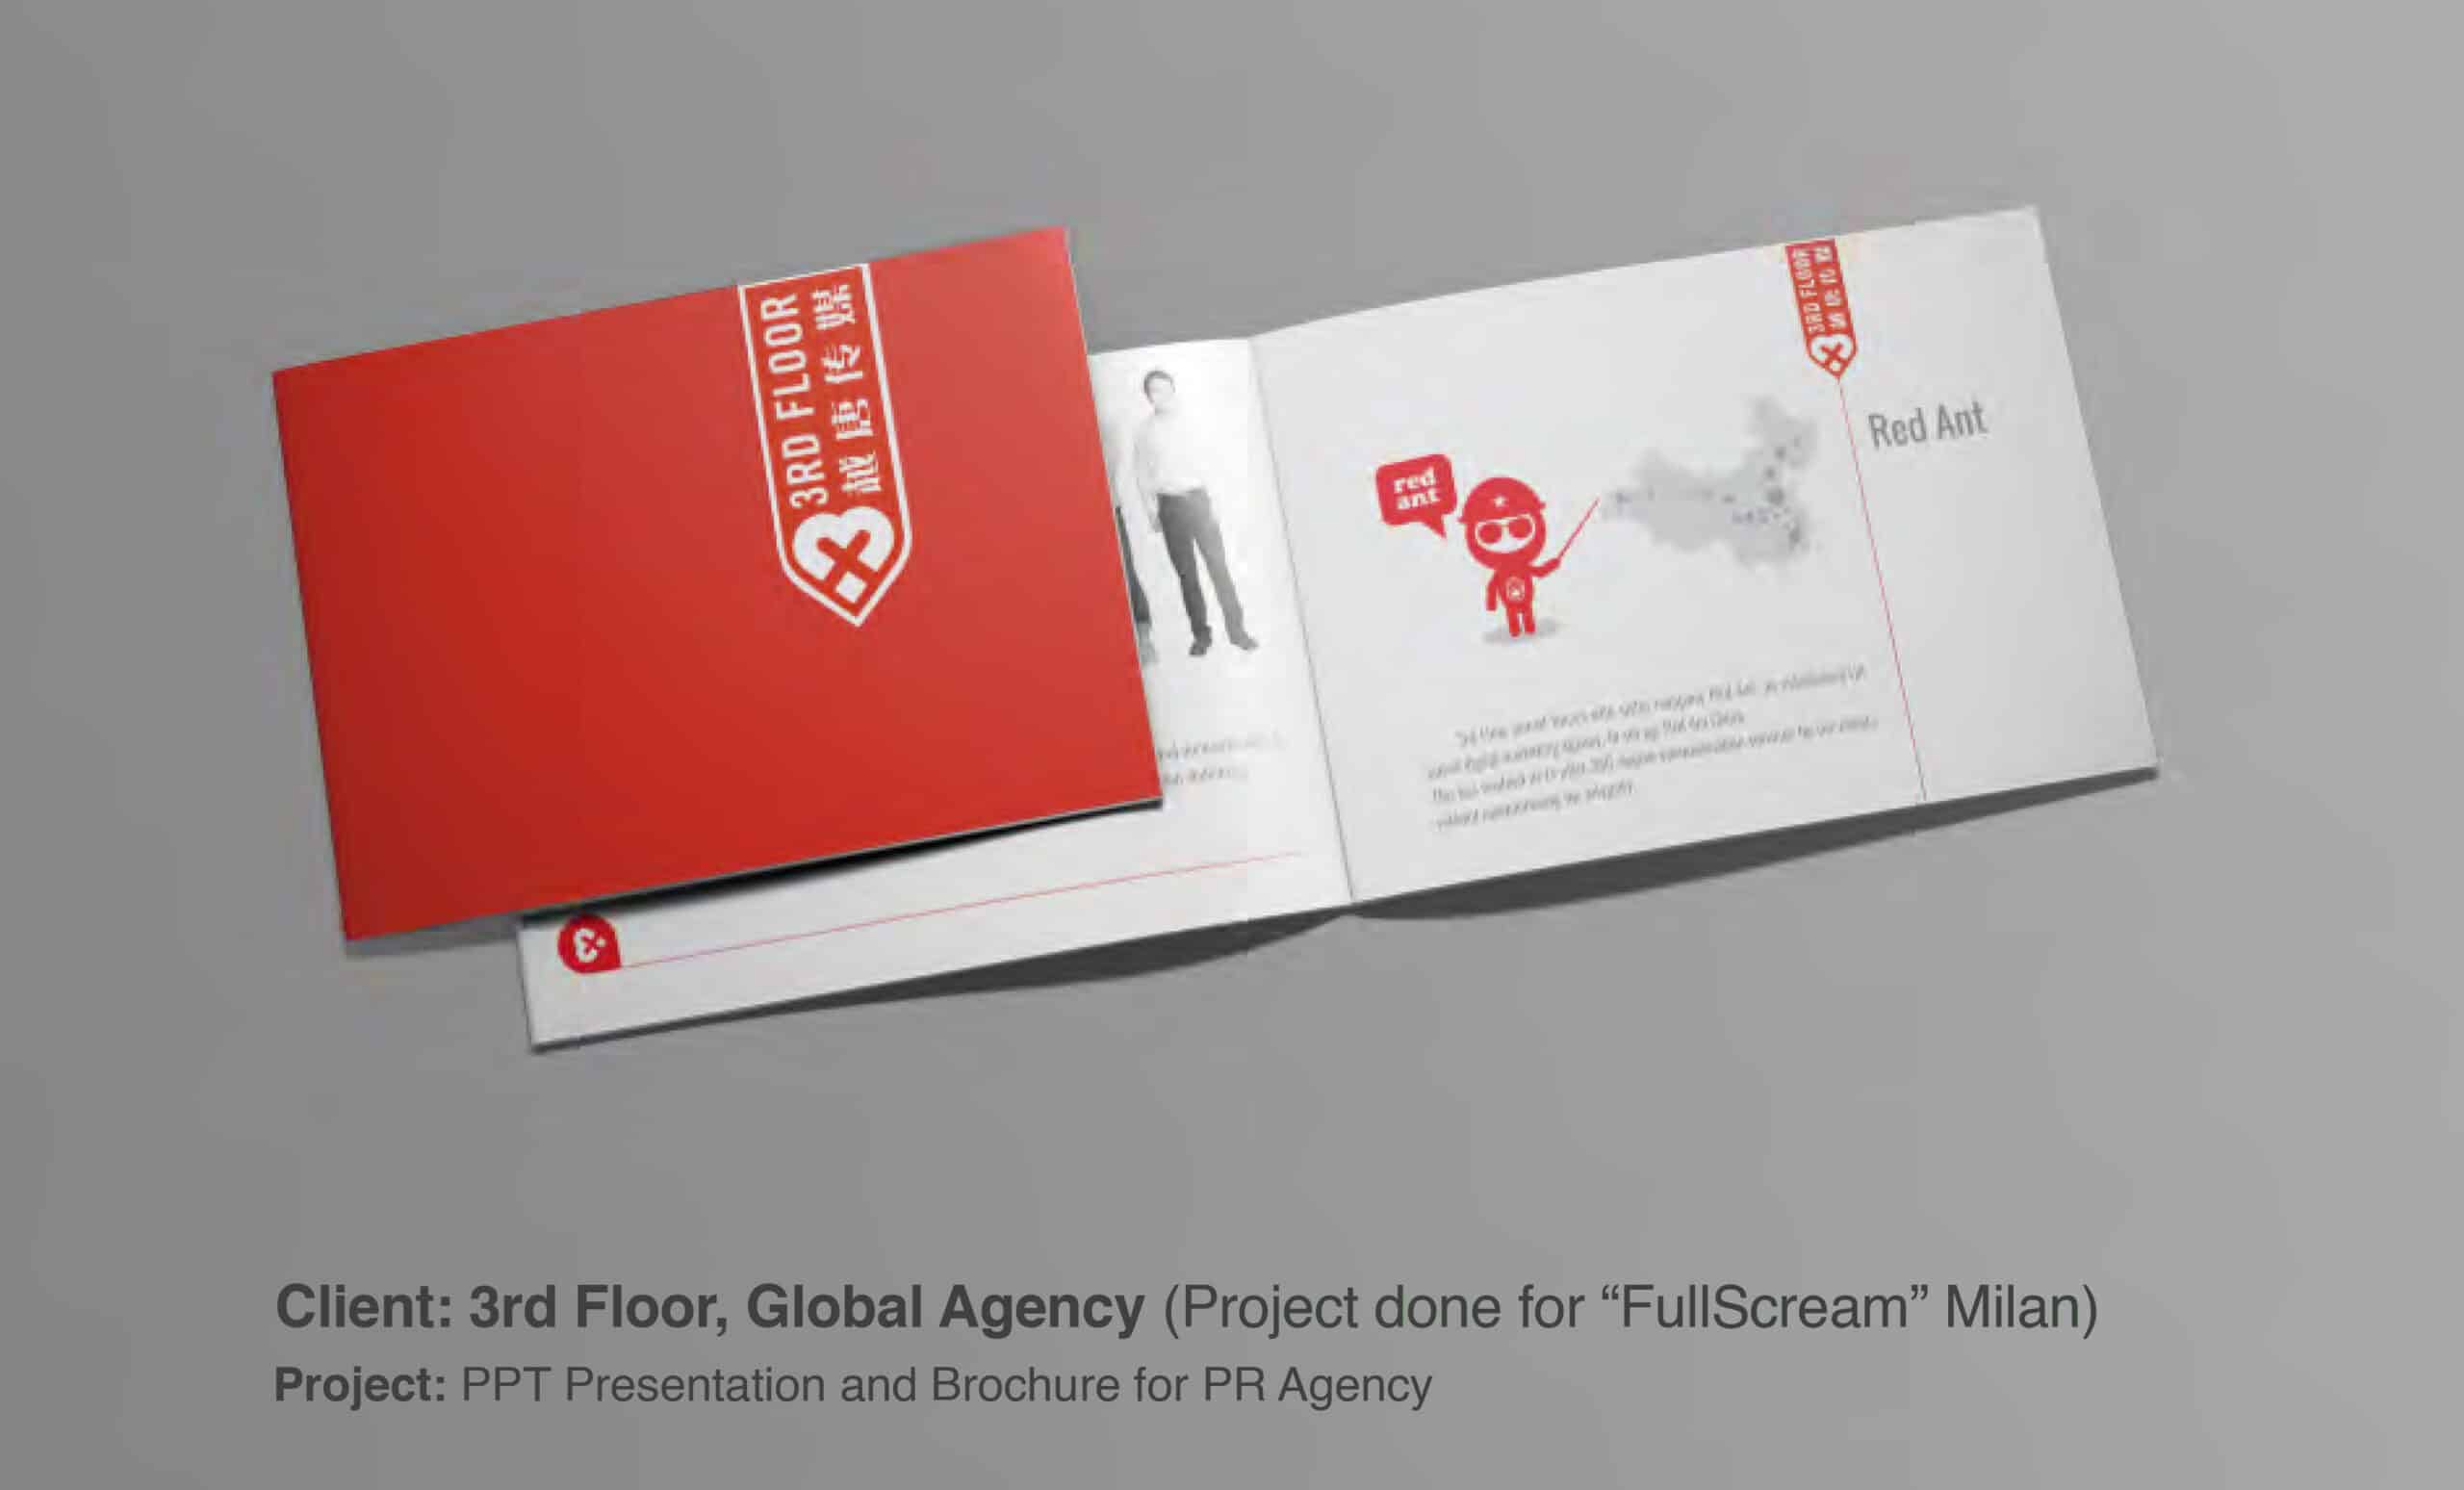 Our Client: 3rd Floor Global Agency